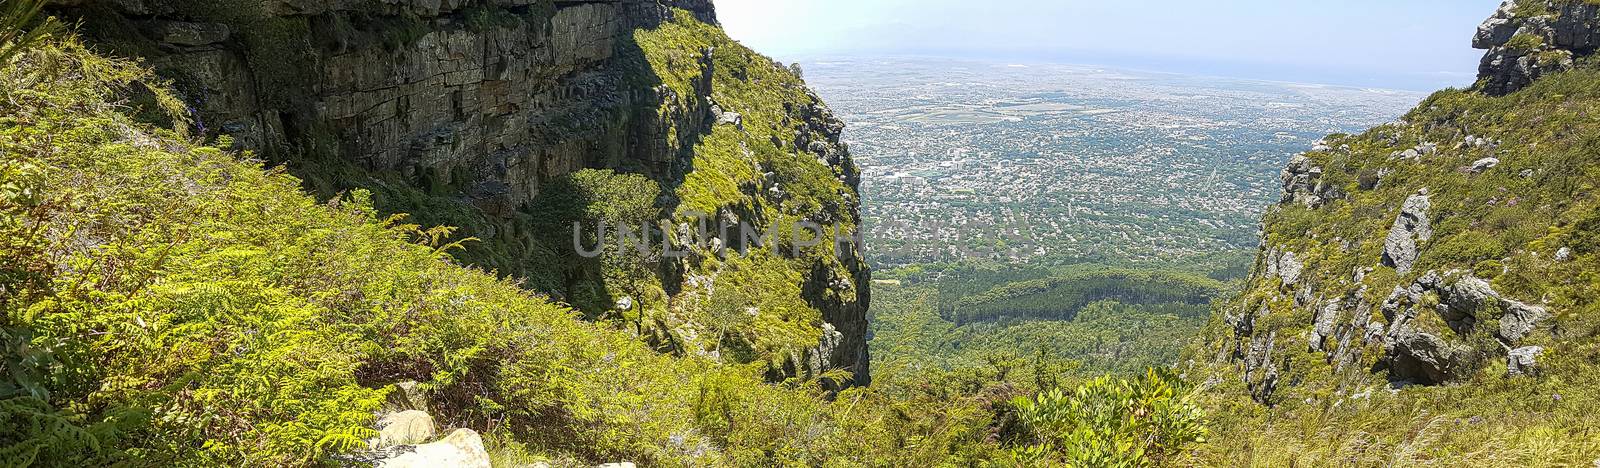 Amazing view from Table Mountain National Park in Cape Town to the Claremont area in South Africa.